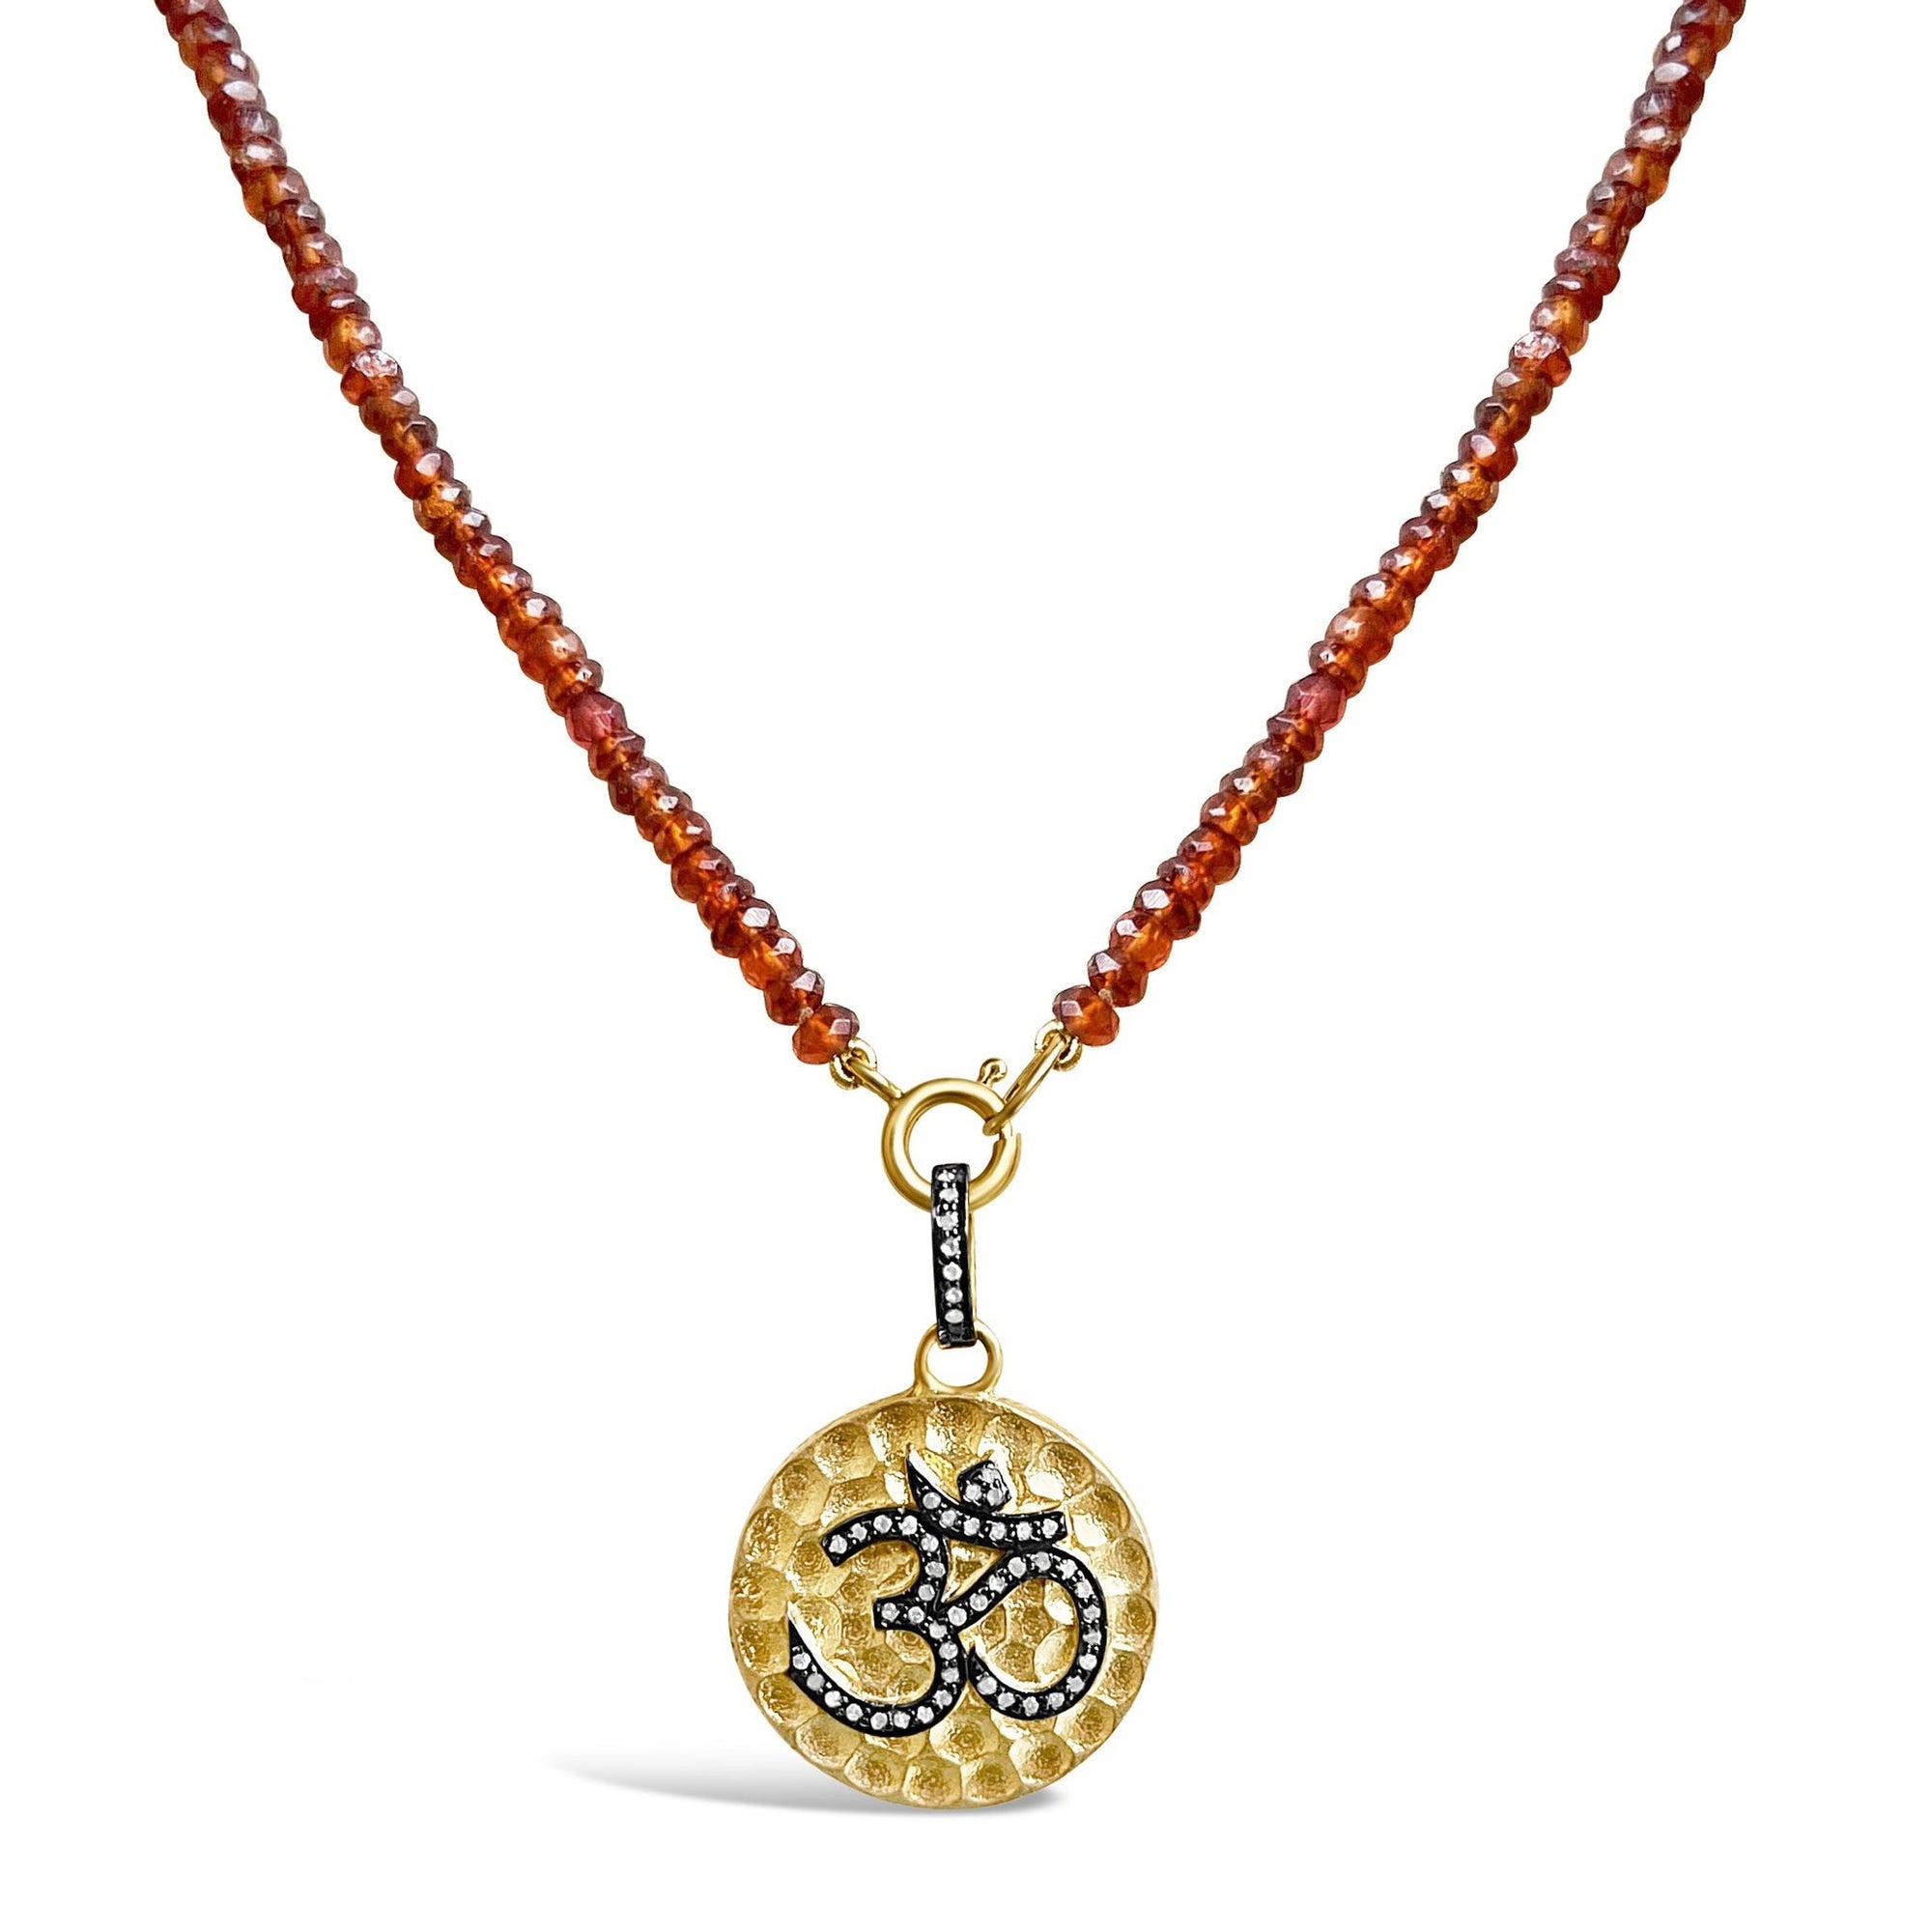 Astrological Gem Hessonite Beaded Necklace With Om Diamond Pendant